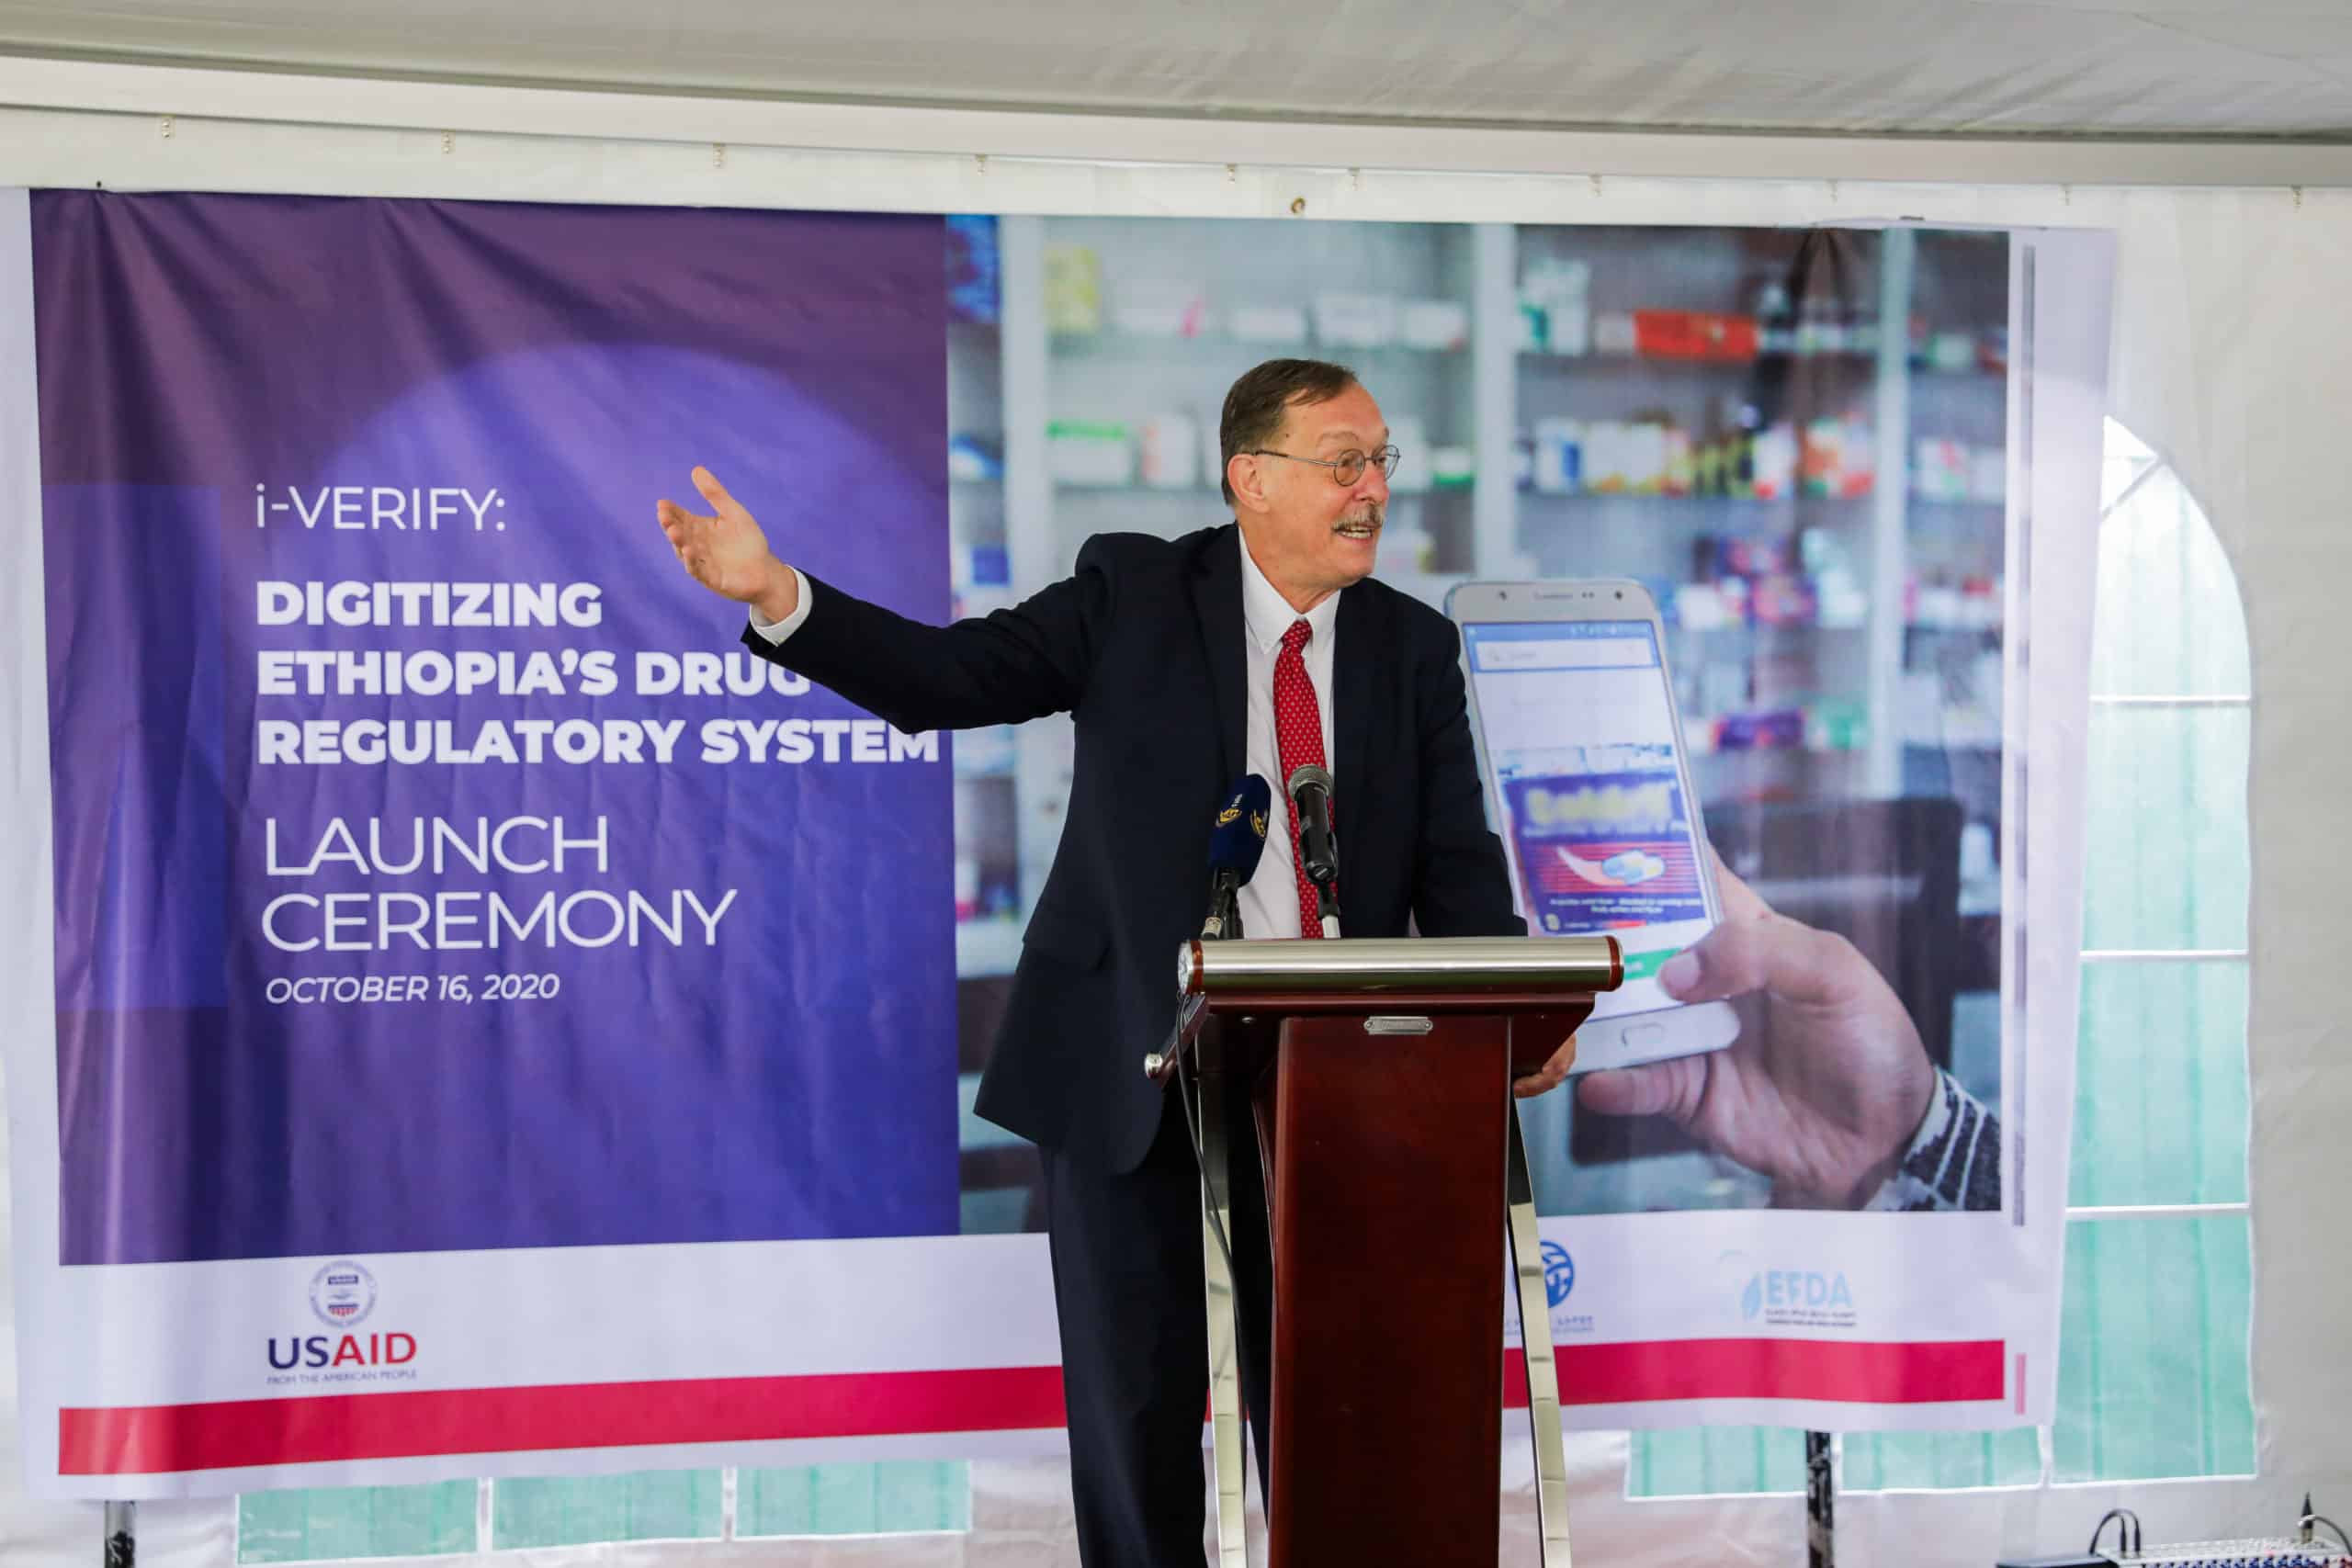 Jim Dobson, USAID’s Deputy Mission Director, at the i-Verify Launch Ceremony.